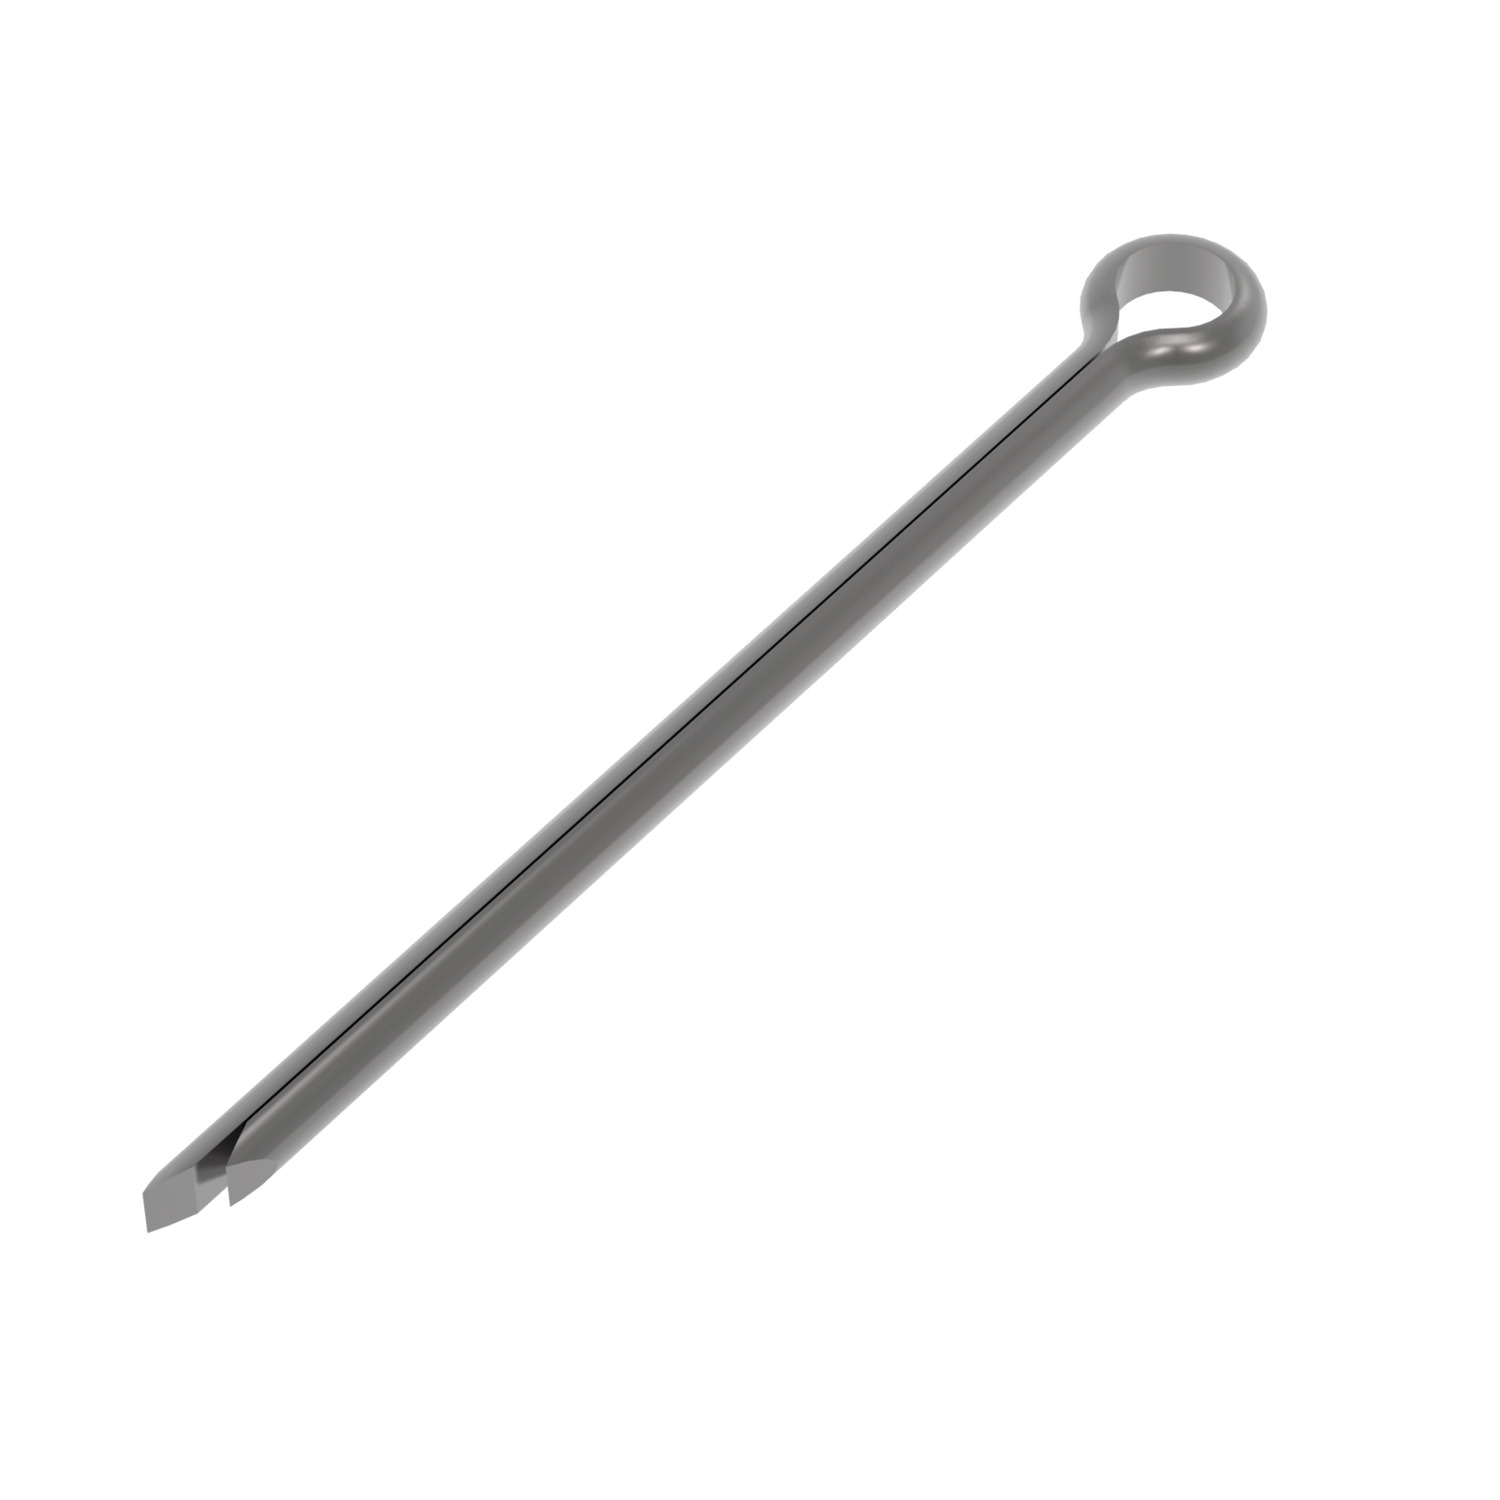 65674.W0060 Steel Cotter Pin - Zinc plated mild St. 6,0 - 71 - 5,7 - 5,9